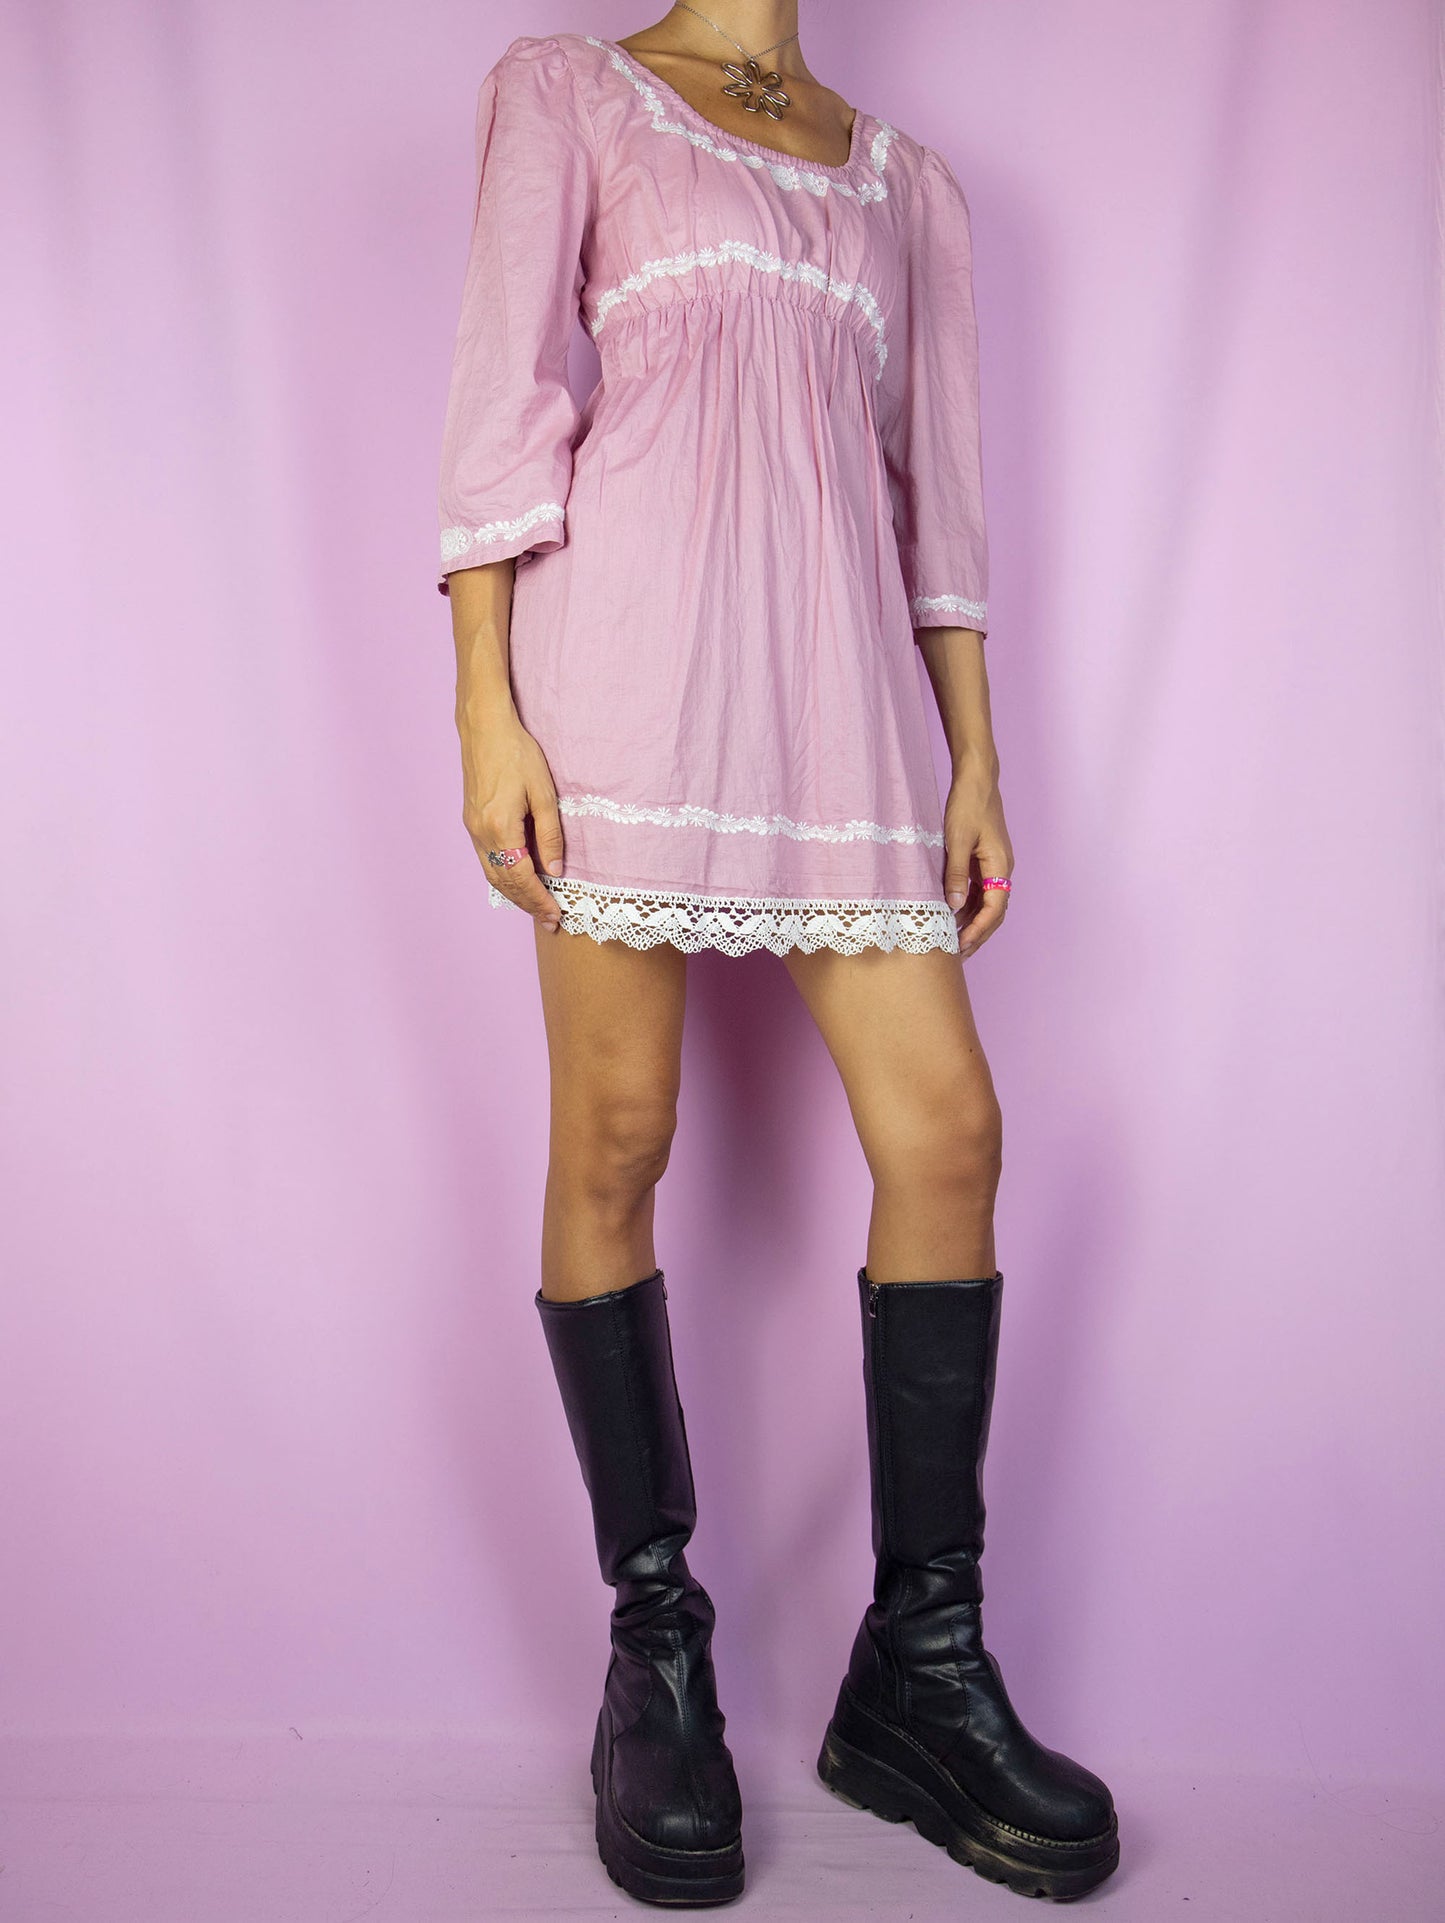 The Y2K Pink Cottage Mini Dress is a vintage dusty pink half-sleeve dress with white embroidered floral details, tied at the back. Romantic country prairie 2000s boho summer dress.